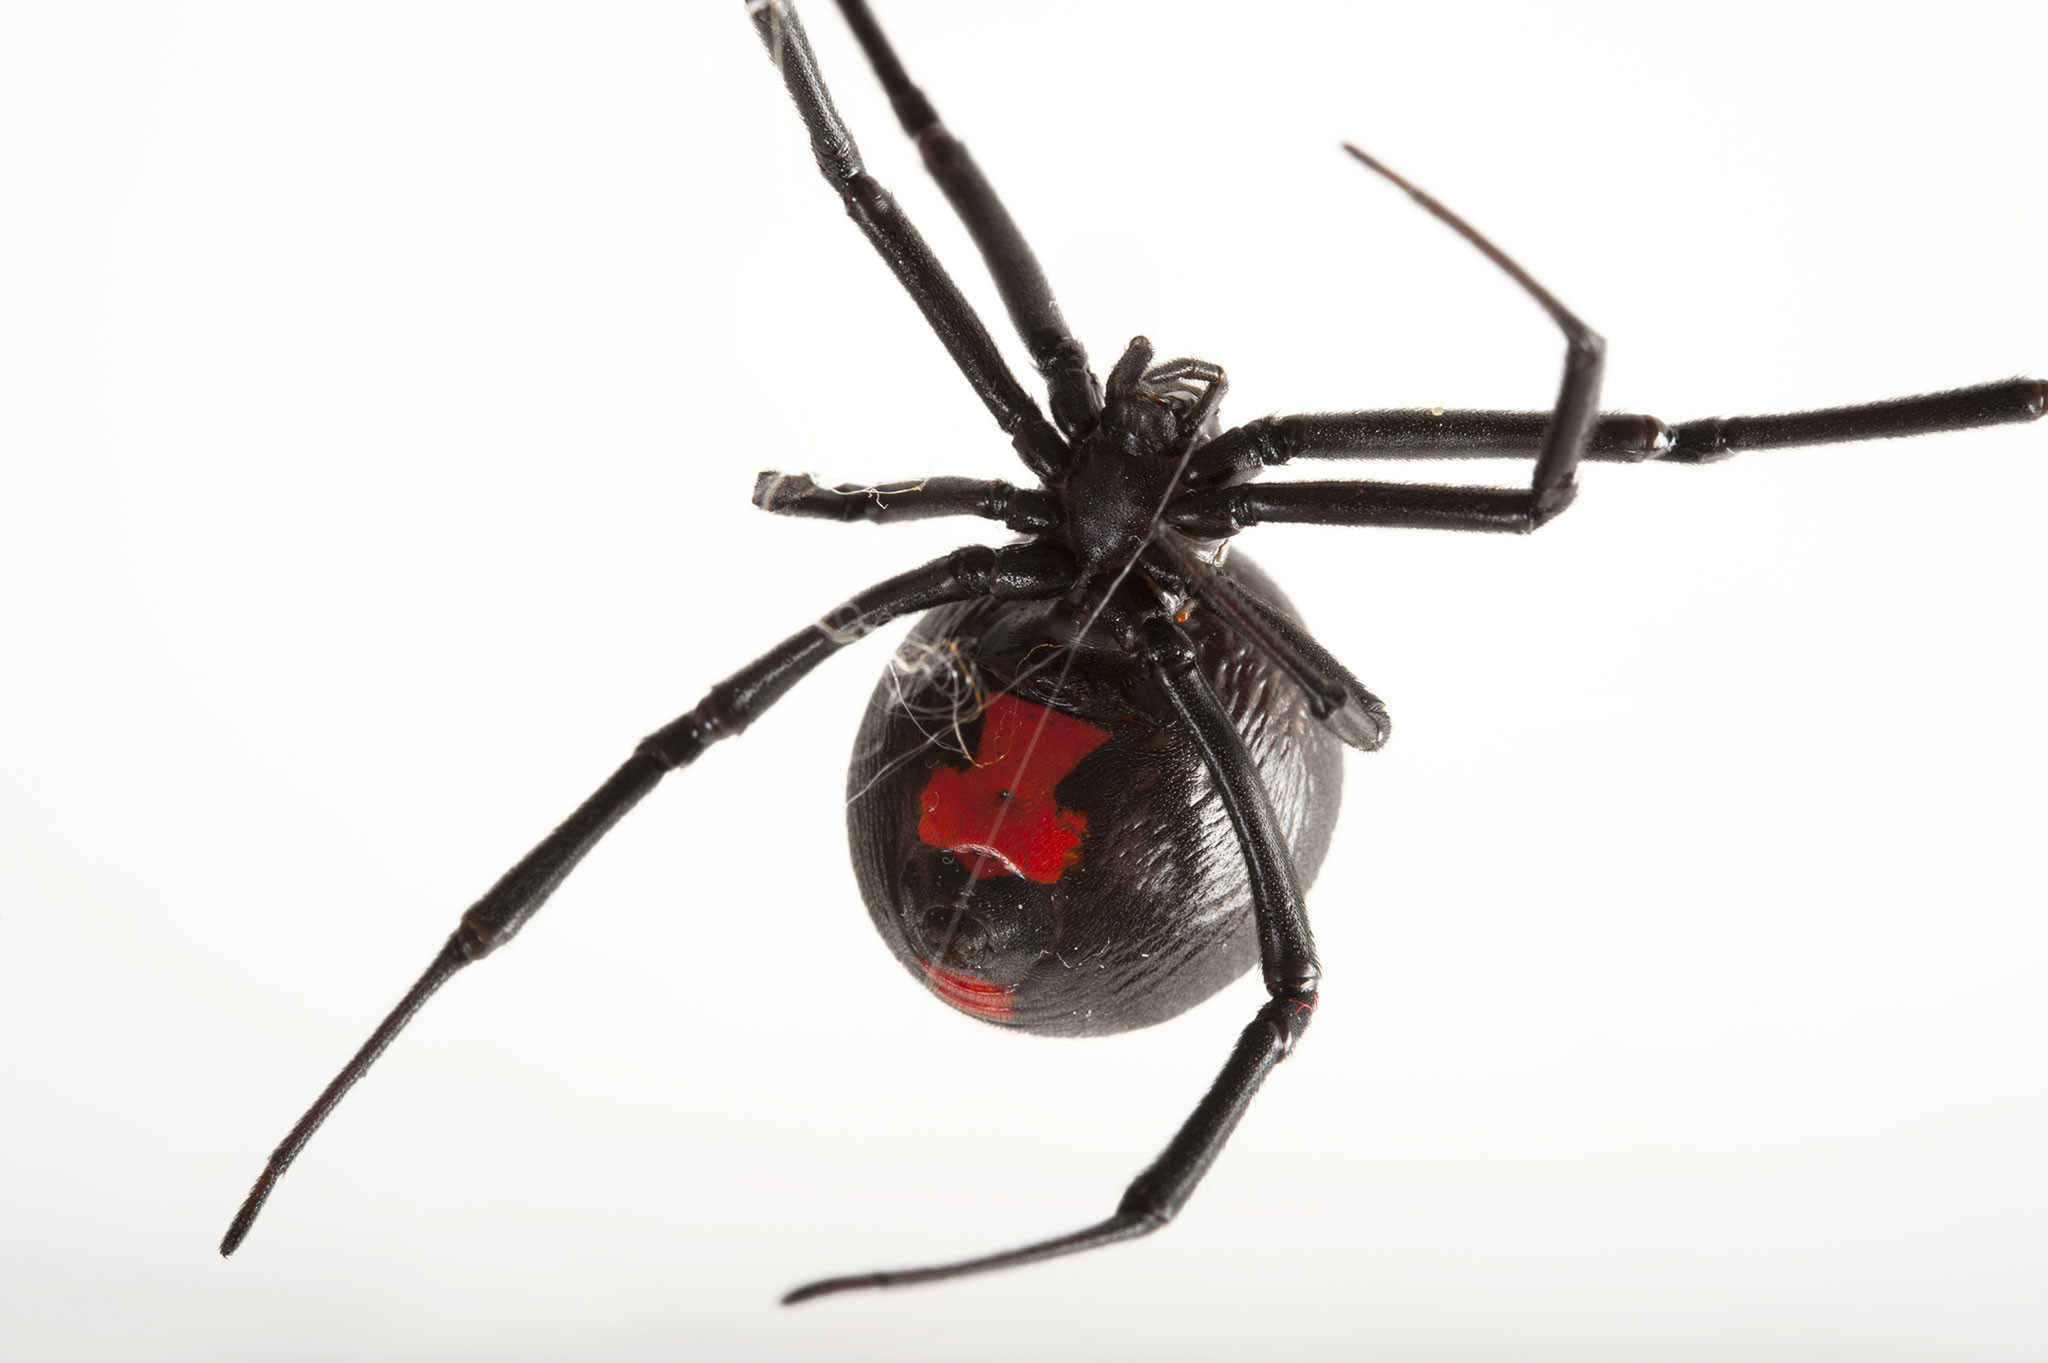 2048x1363 Uncategorized widow spider stock illustration royalty free - Female Black  Widow Spiders Are About 5 Inch